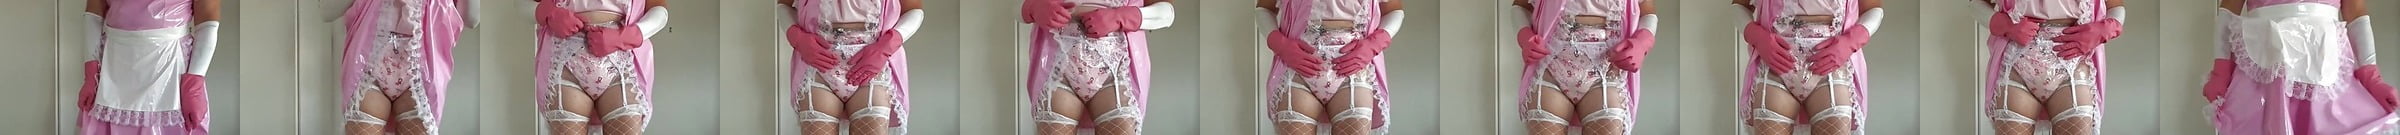 Diapered Sissy Baby Cuckold Hd Videos Porn A Xhamster Xhamster